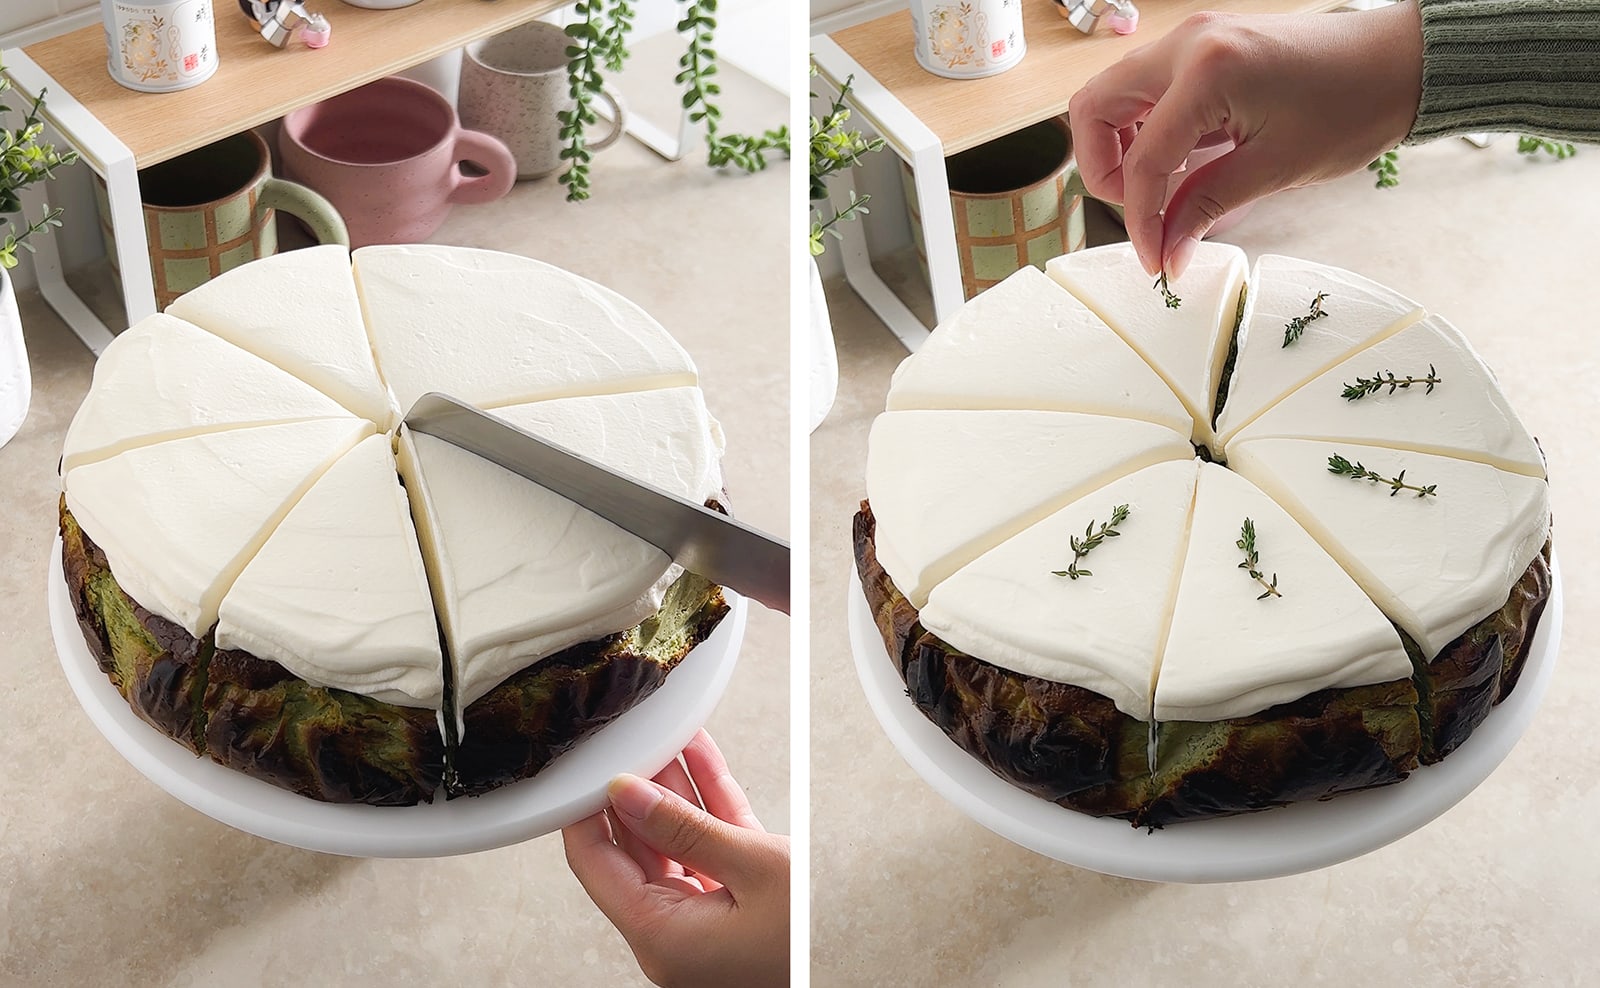 Left to right: knife cutting cheesecake into slices, hand placing thyme sprig on top of cheesecake slices.